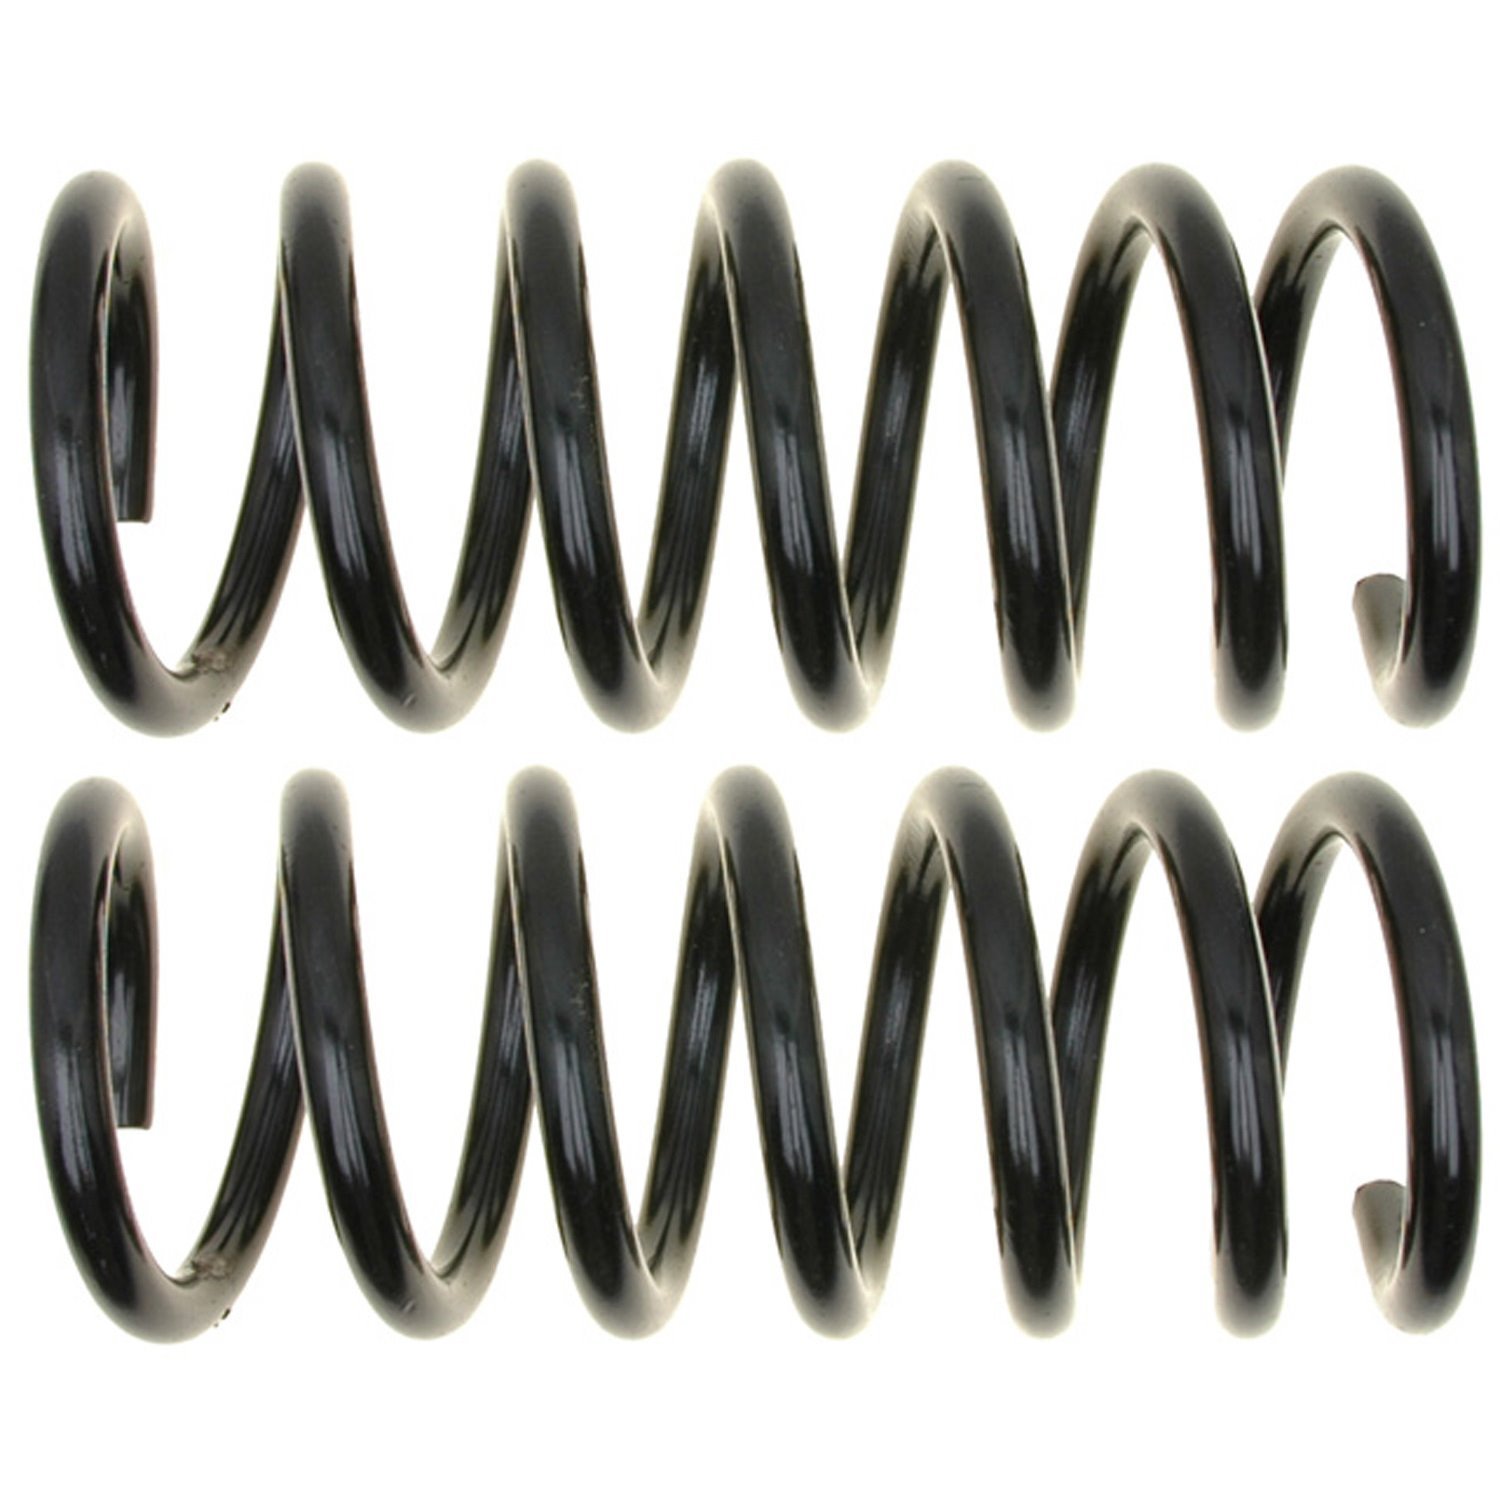 Rear Coil Springs 2010-2012 Chevy Equinox, 2008-2010 Saturn Vue 2WD